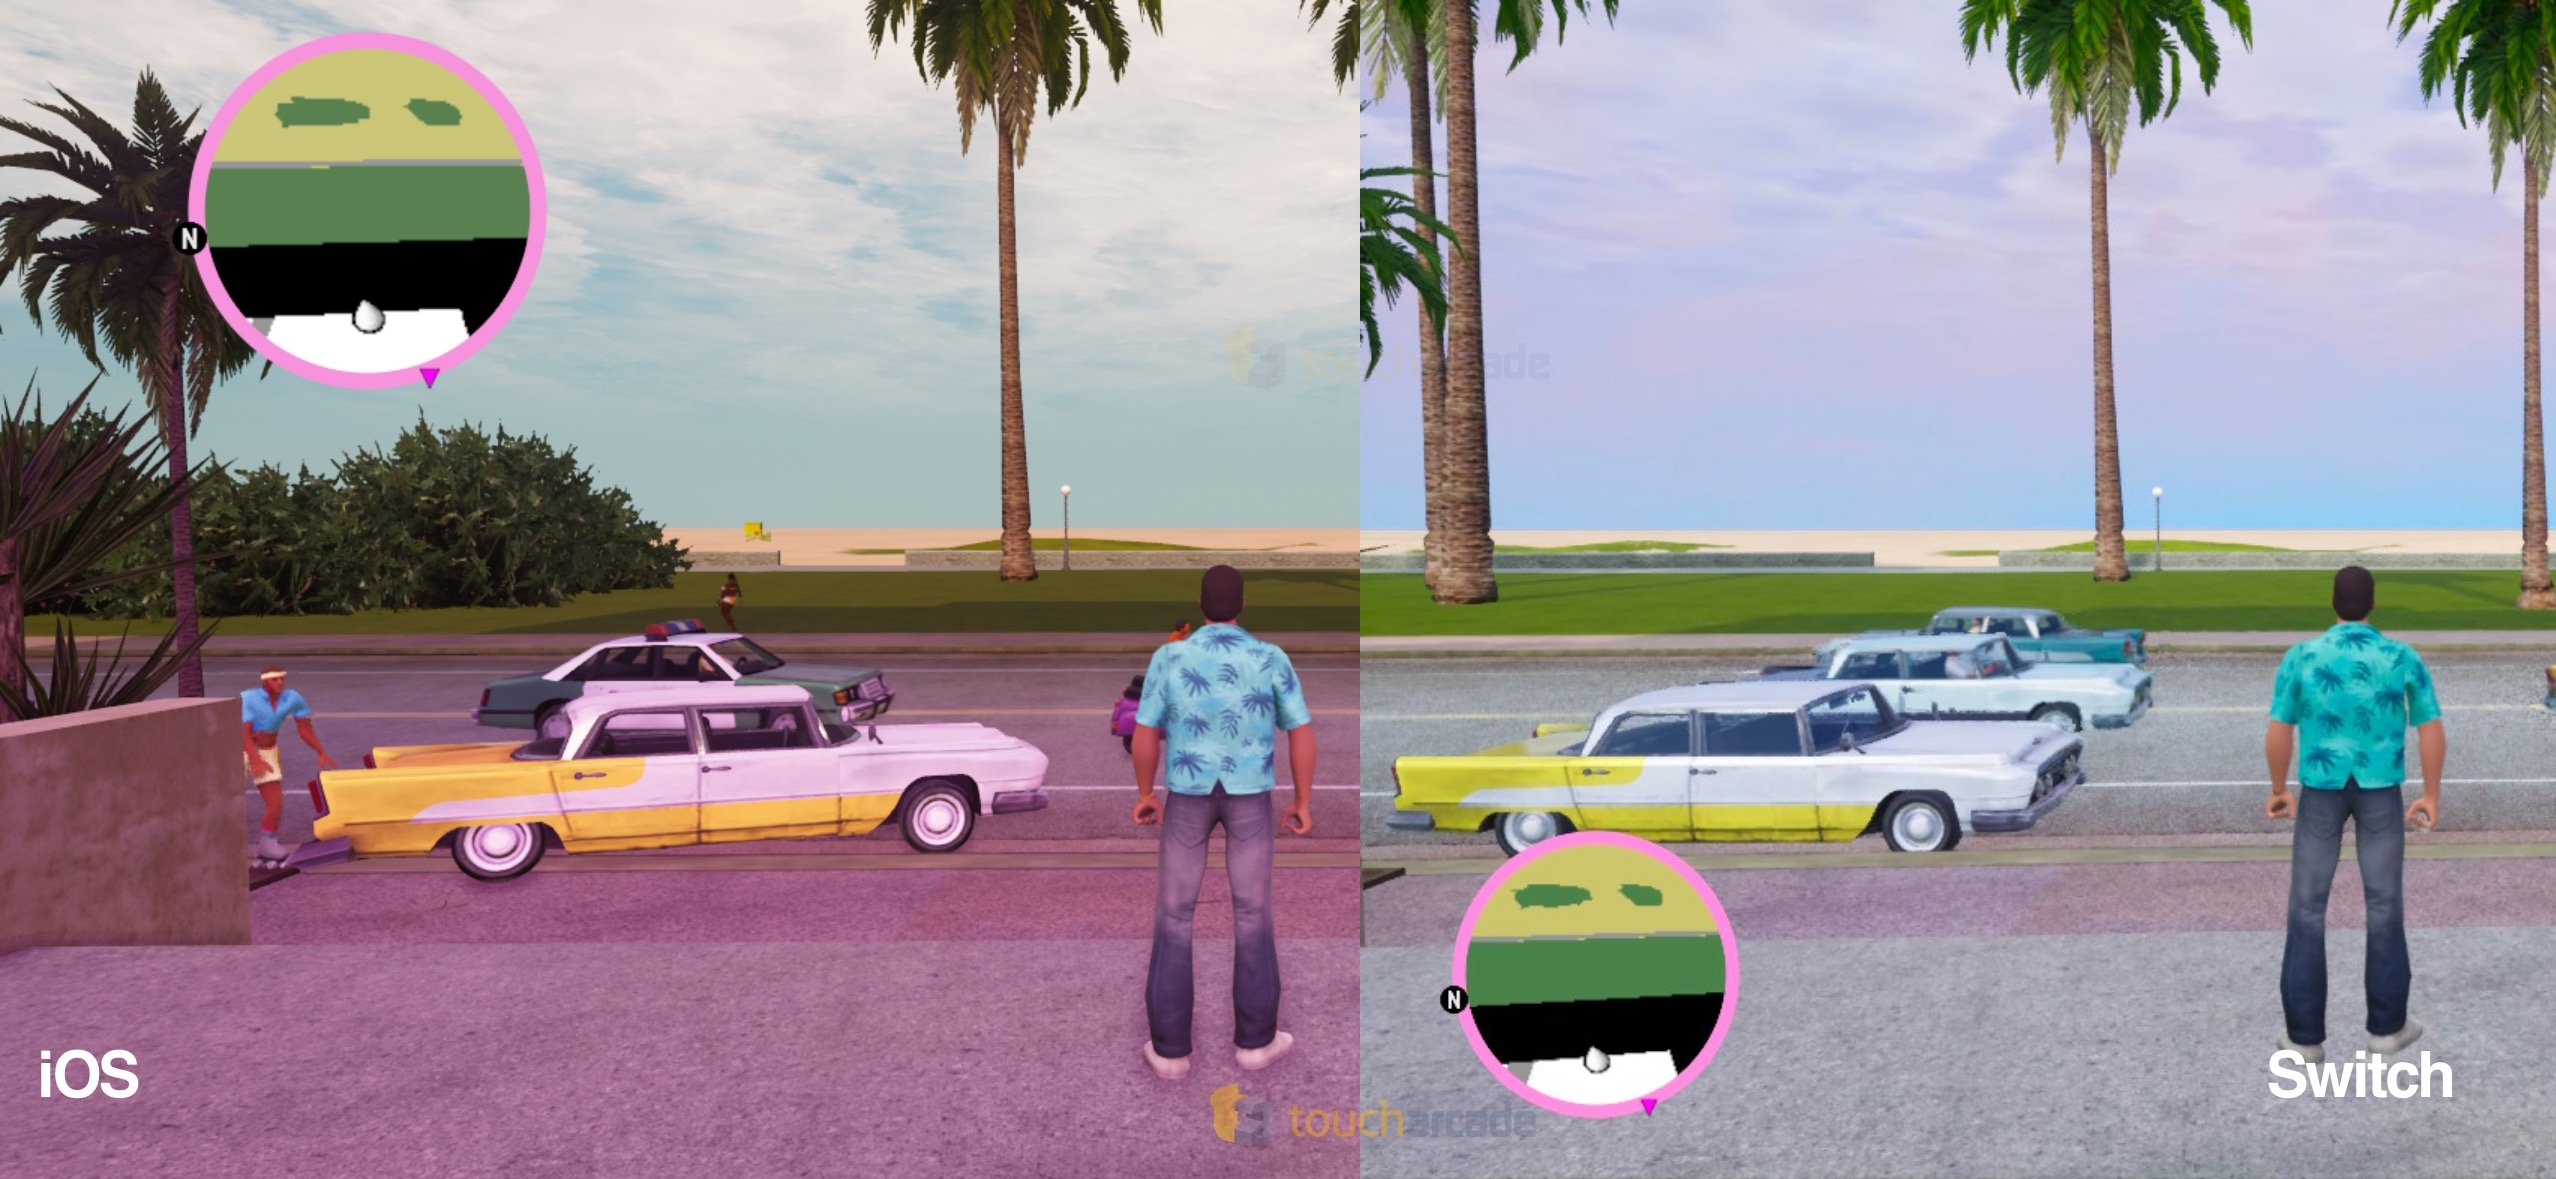 Ultimate Vice City Download - Update for the GTA Vice City game